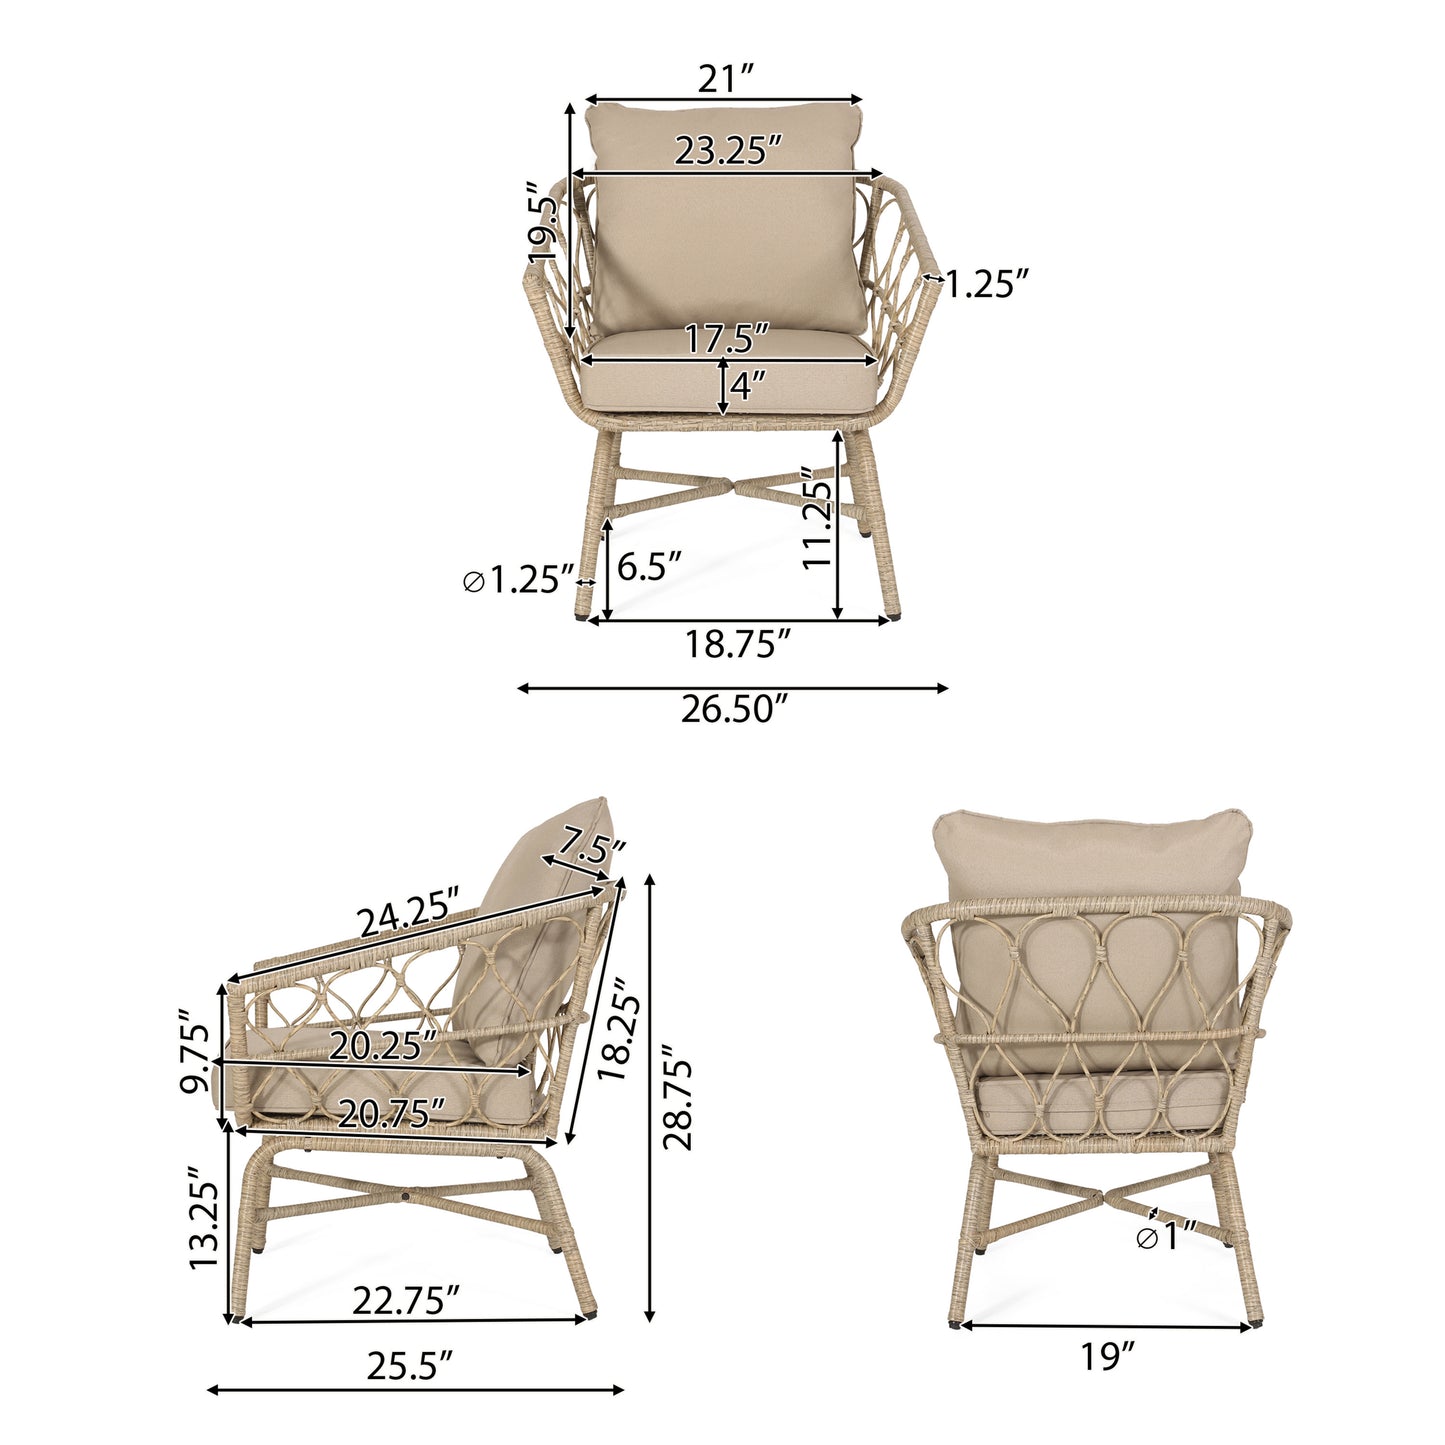 Colmar Outdoor Wicker Club Chairs with Cushions, Set of 2, Light Brown and Beige